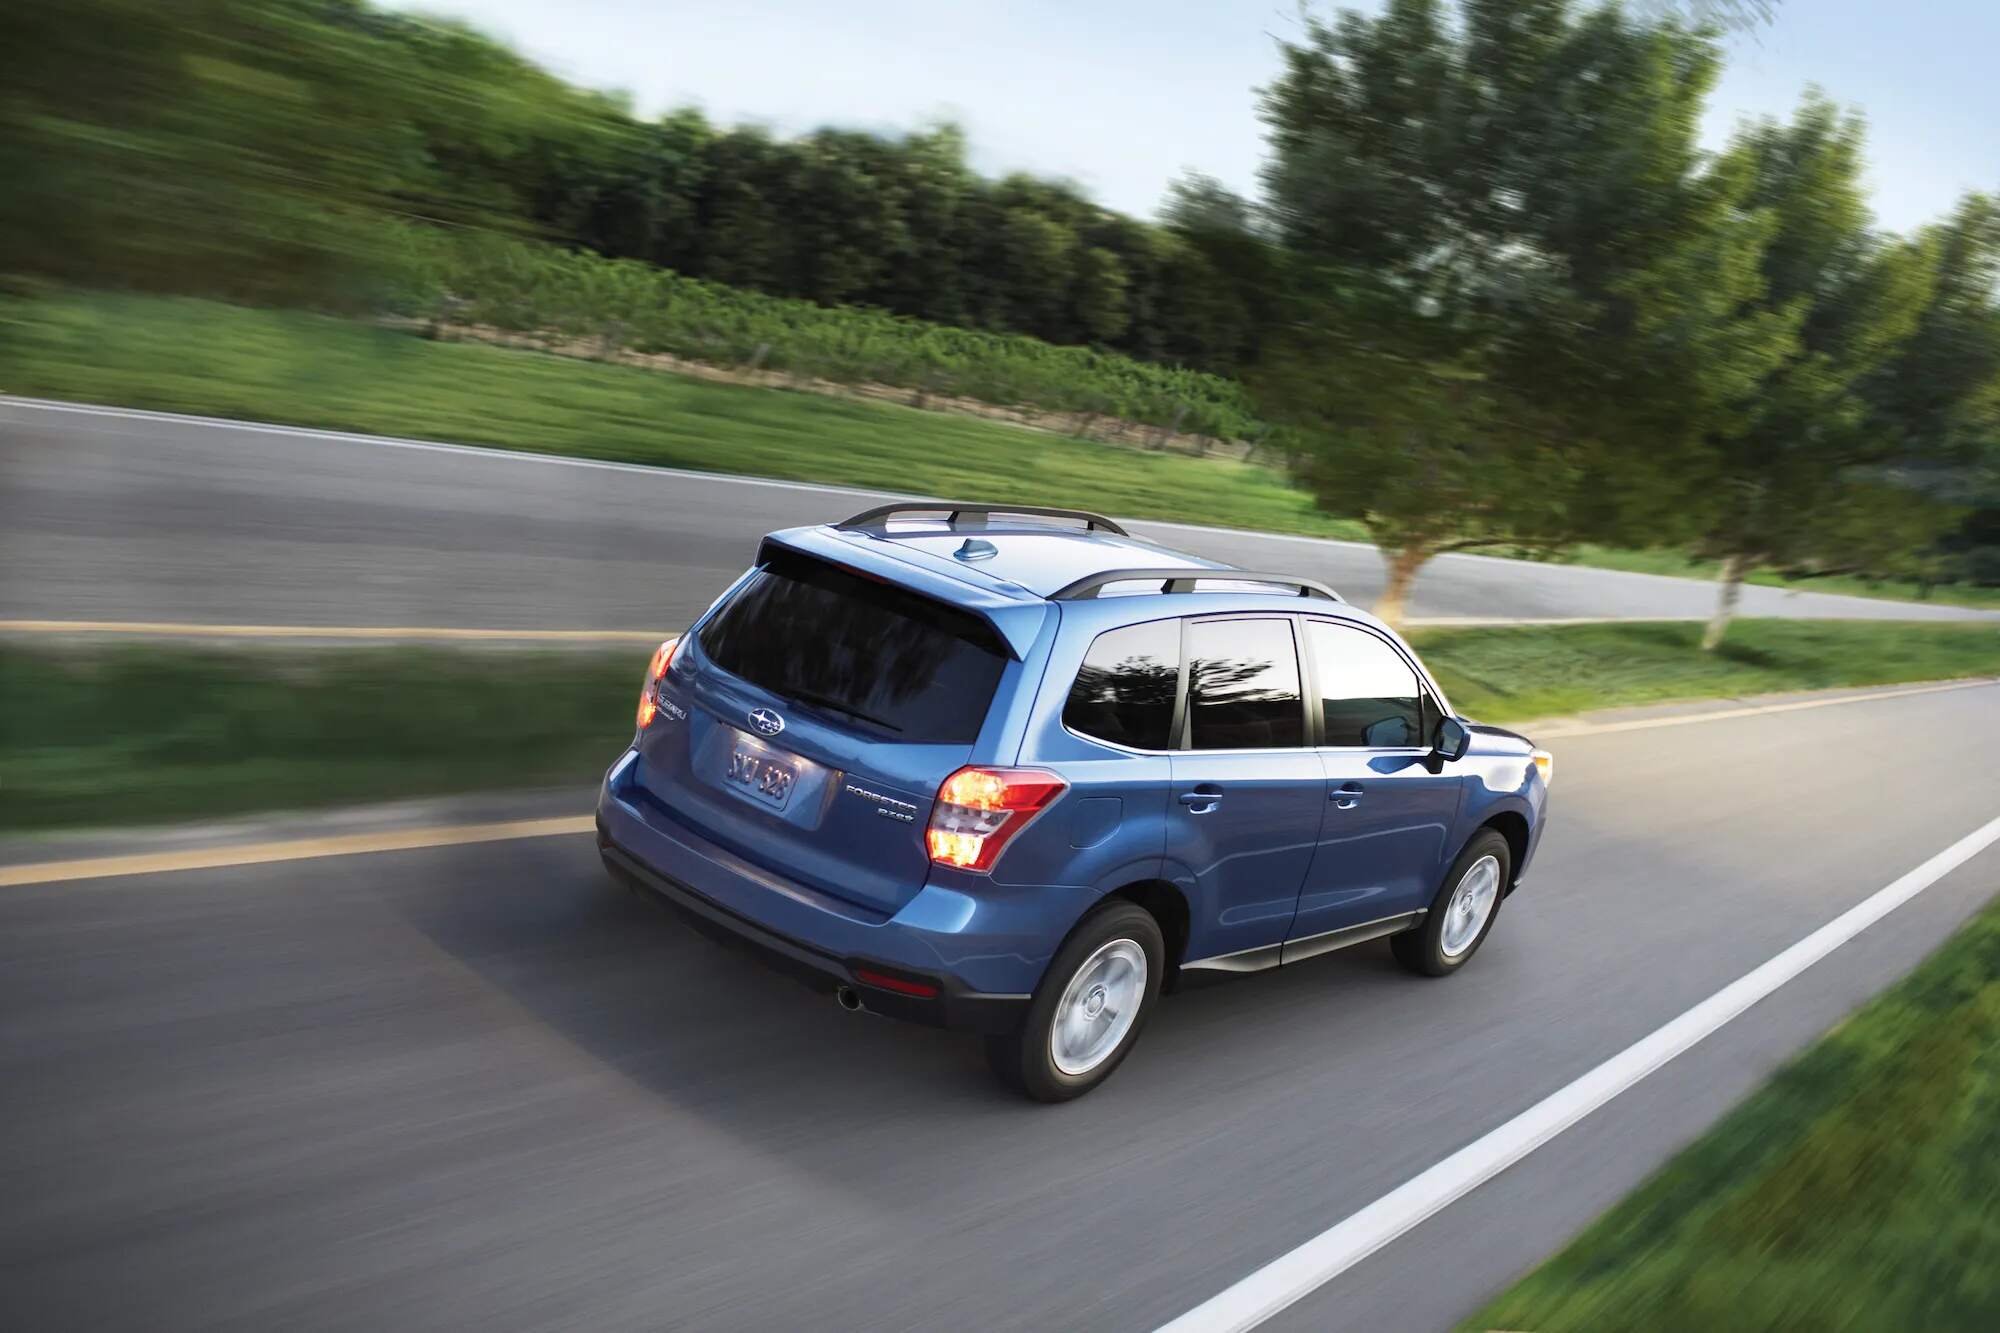 The 2016 Subaru Forester is a reliable used compact SUV under $20K